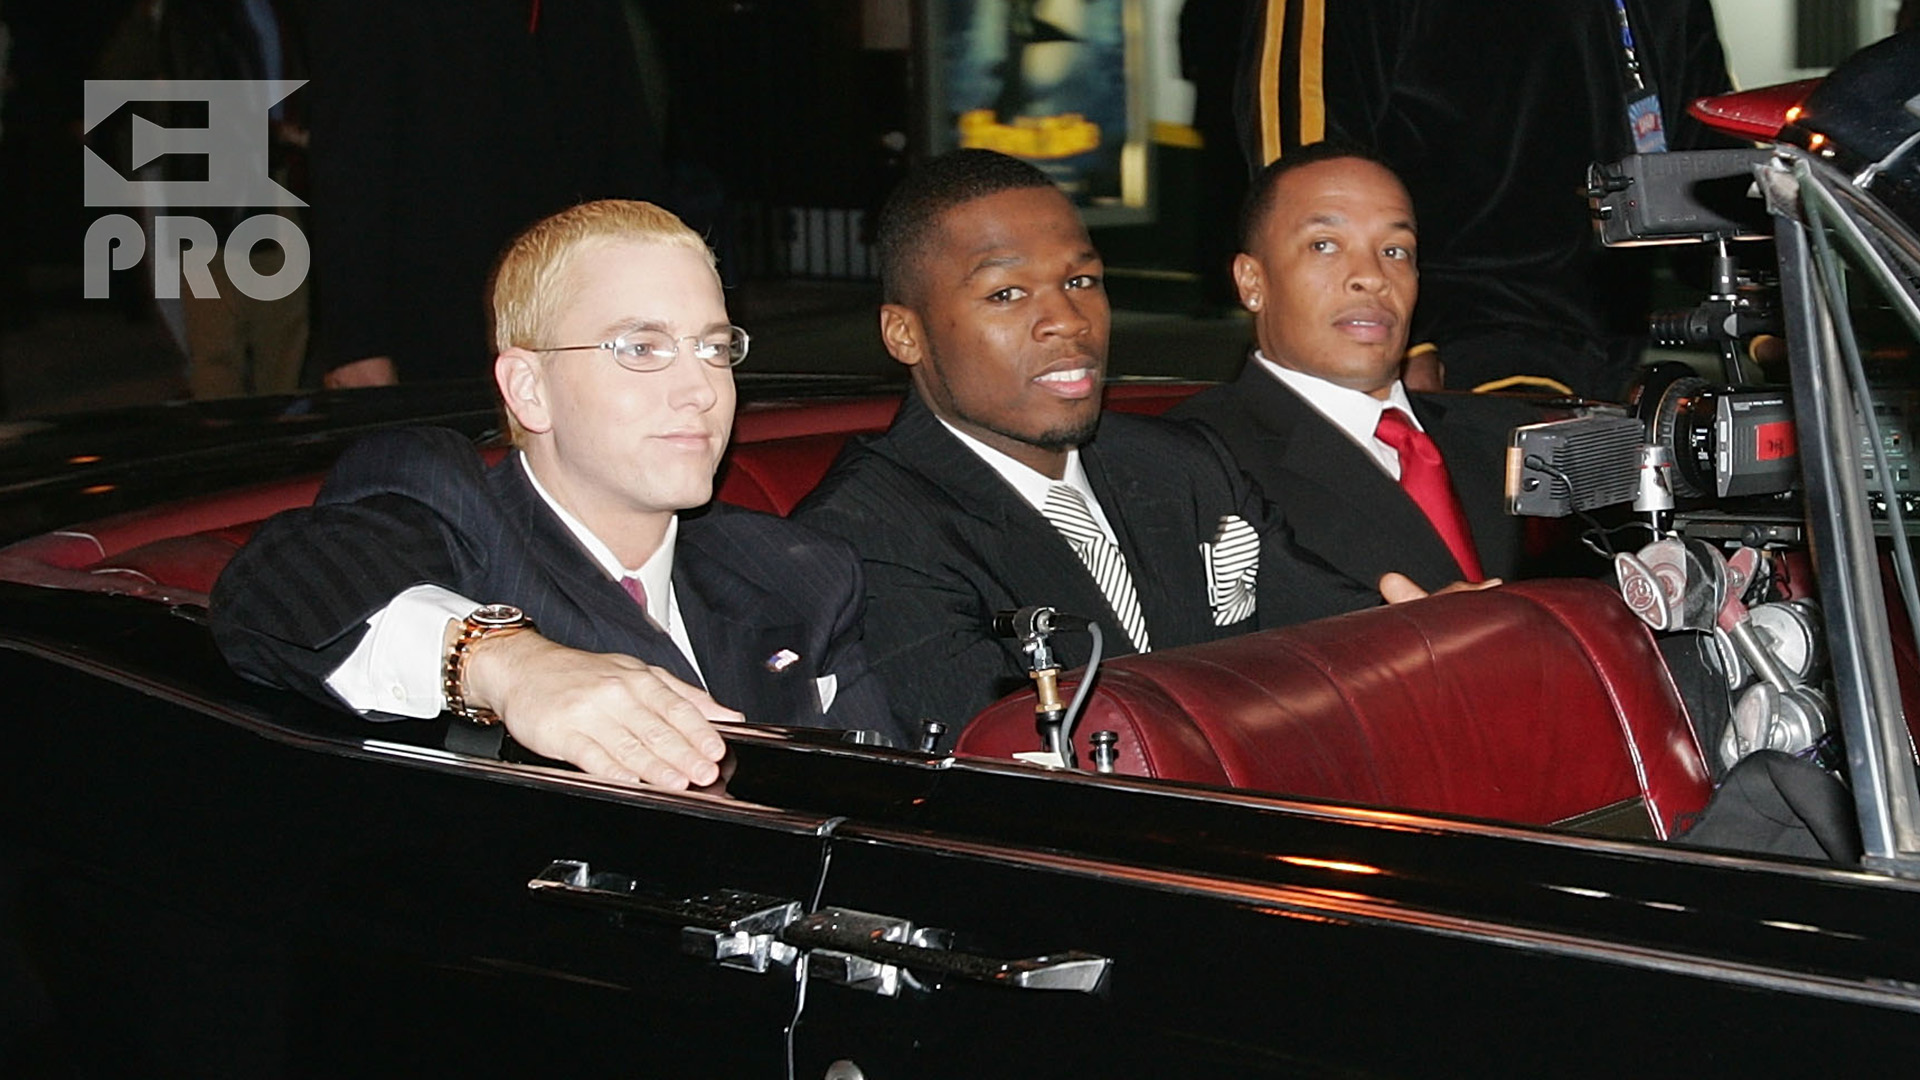 Rappers Eminem, 50 Cent and Dr. Dre arrive at the Shady National Convention to launch Shade 45, a new satellite radio station at the Roseland Ballroom October 28, 2004 in New York City. (Photo by Frank Micelotta